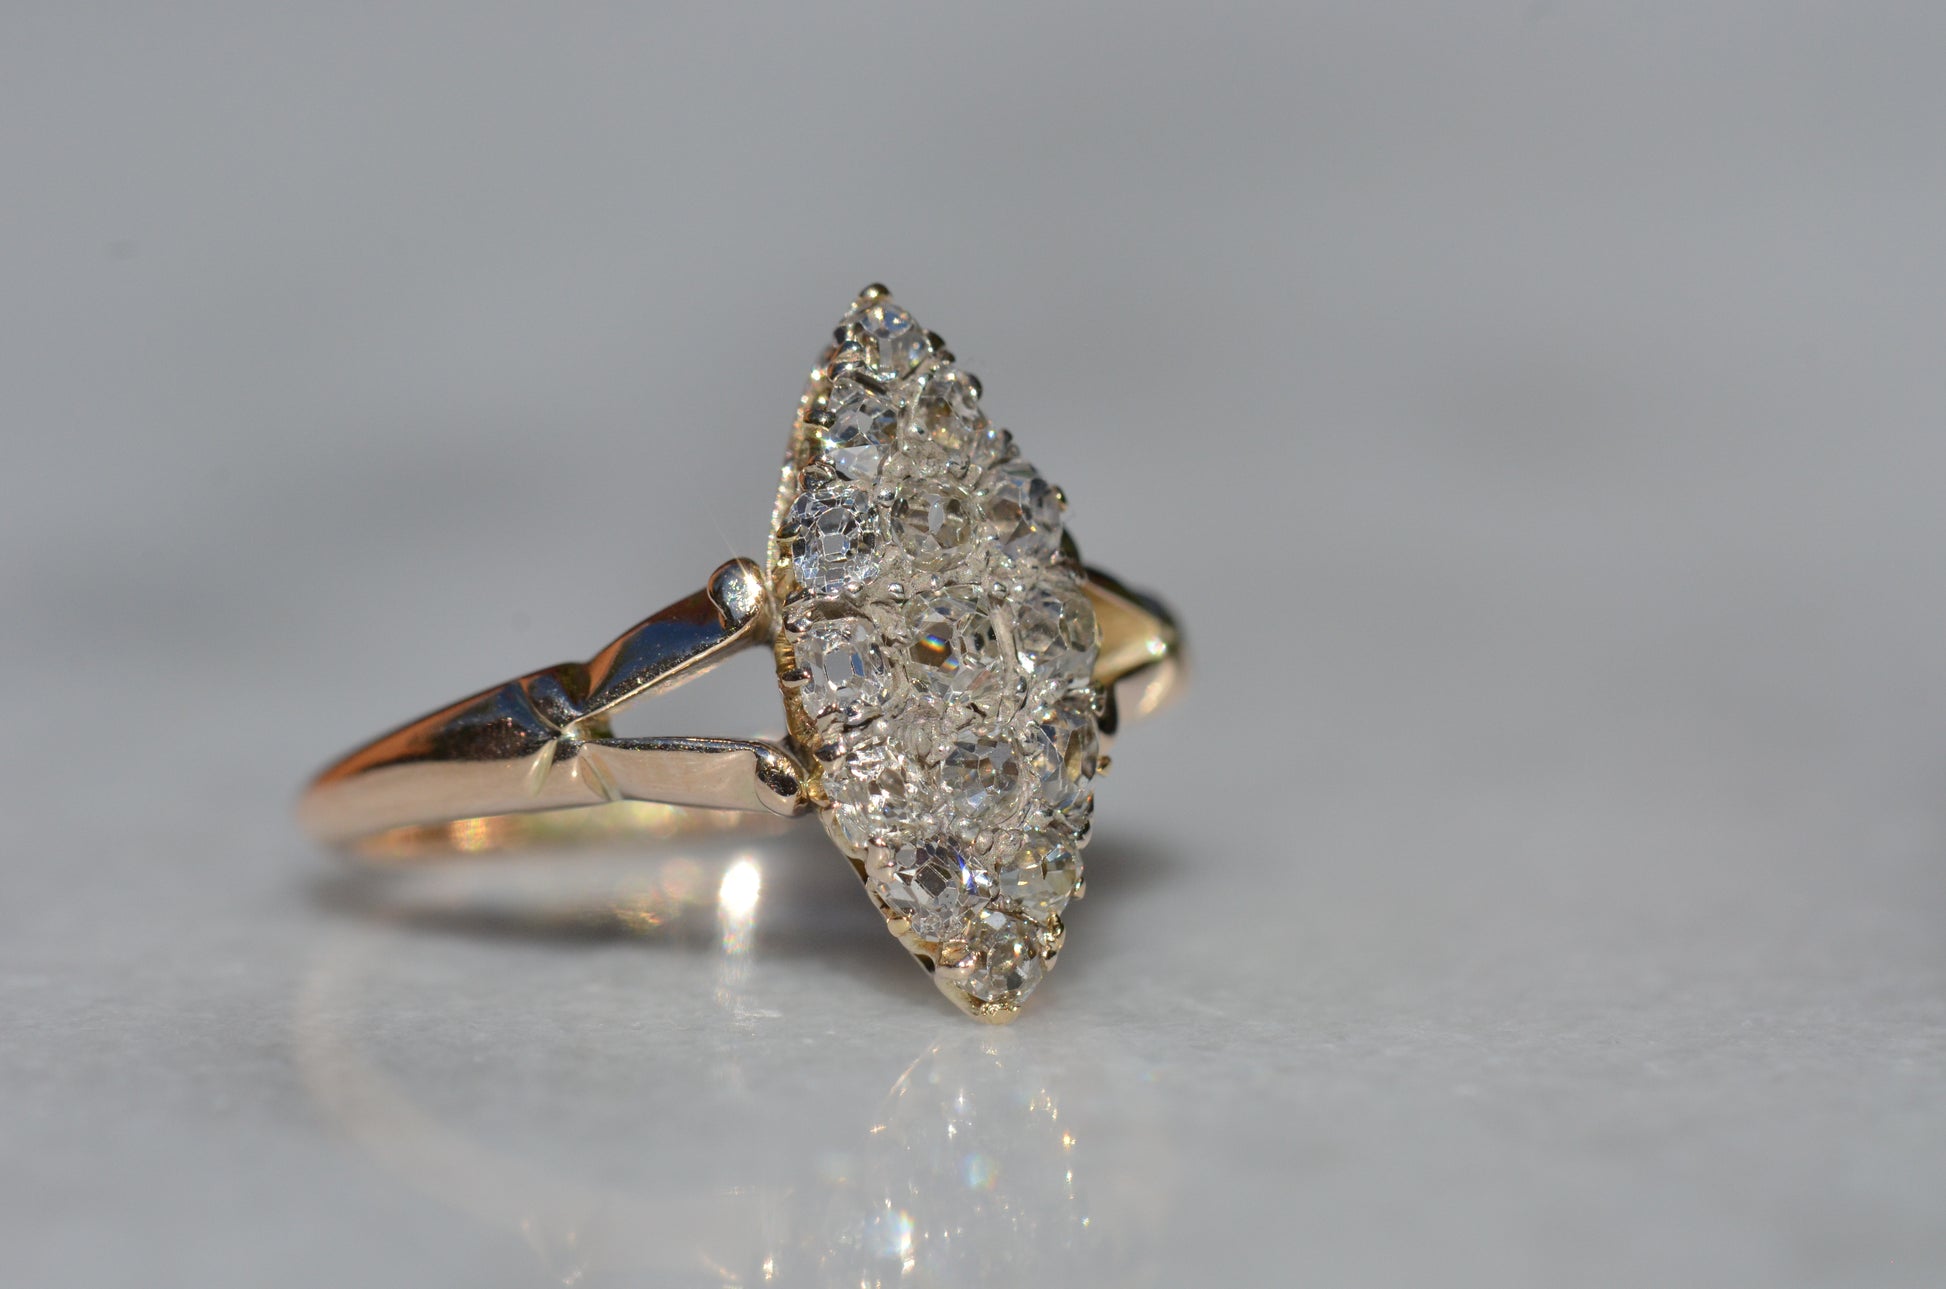 The closely cropped macro of this Victorian diamond navette ring is photographed turned slightly to the right to showcase the high rise of the crowns of each hand-cut diamond.